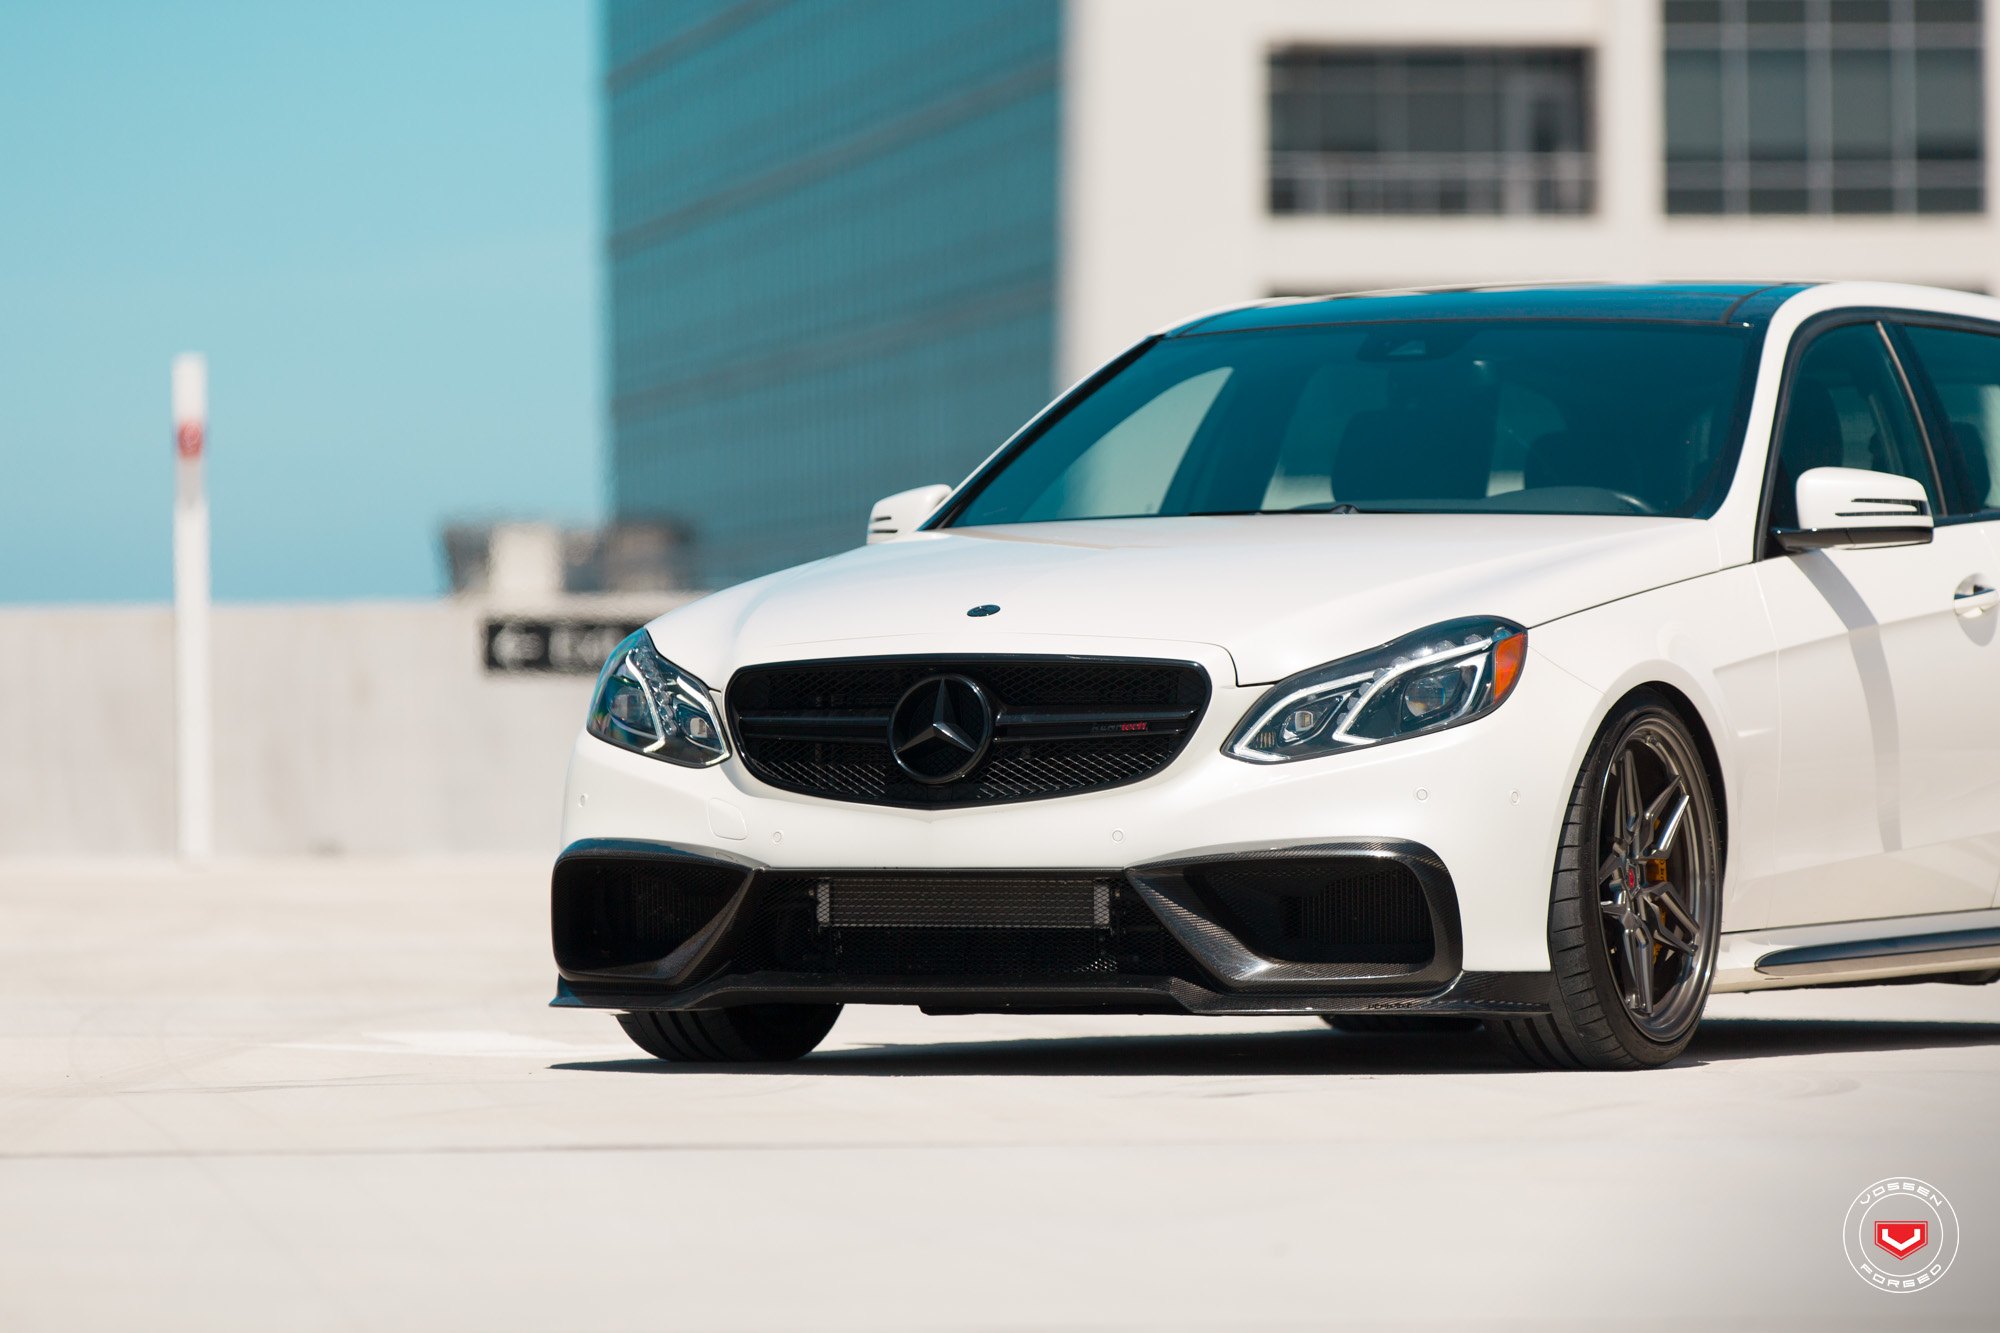 Blacked Out Mesh Grille on White Mercedes E Class - Photo by Vossen